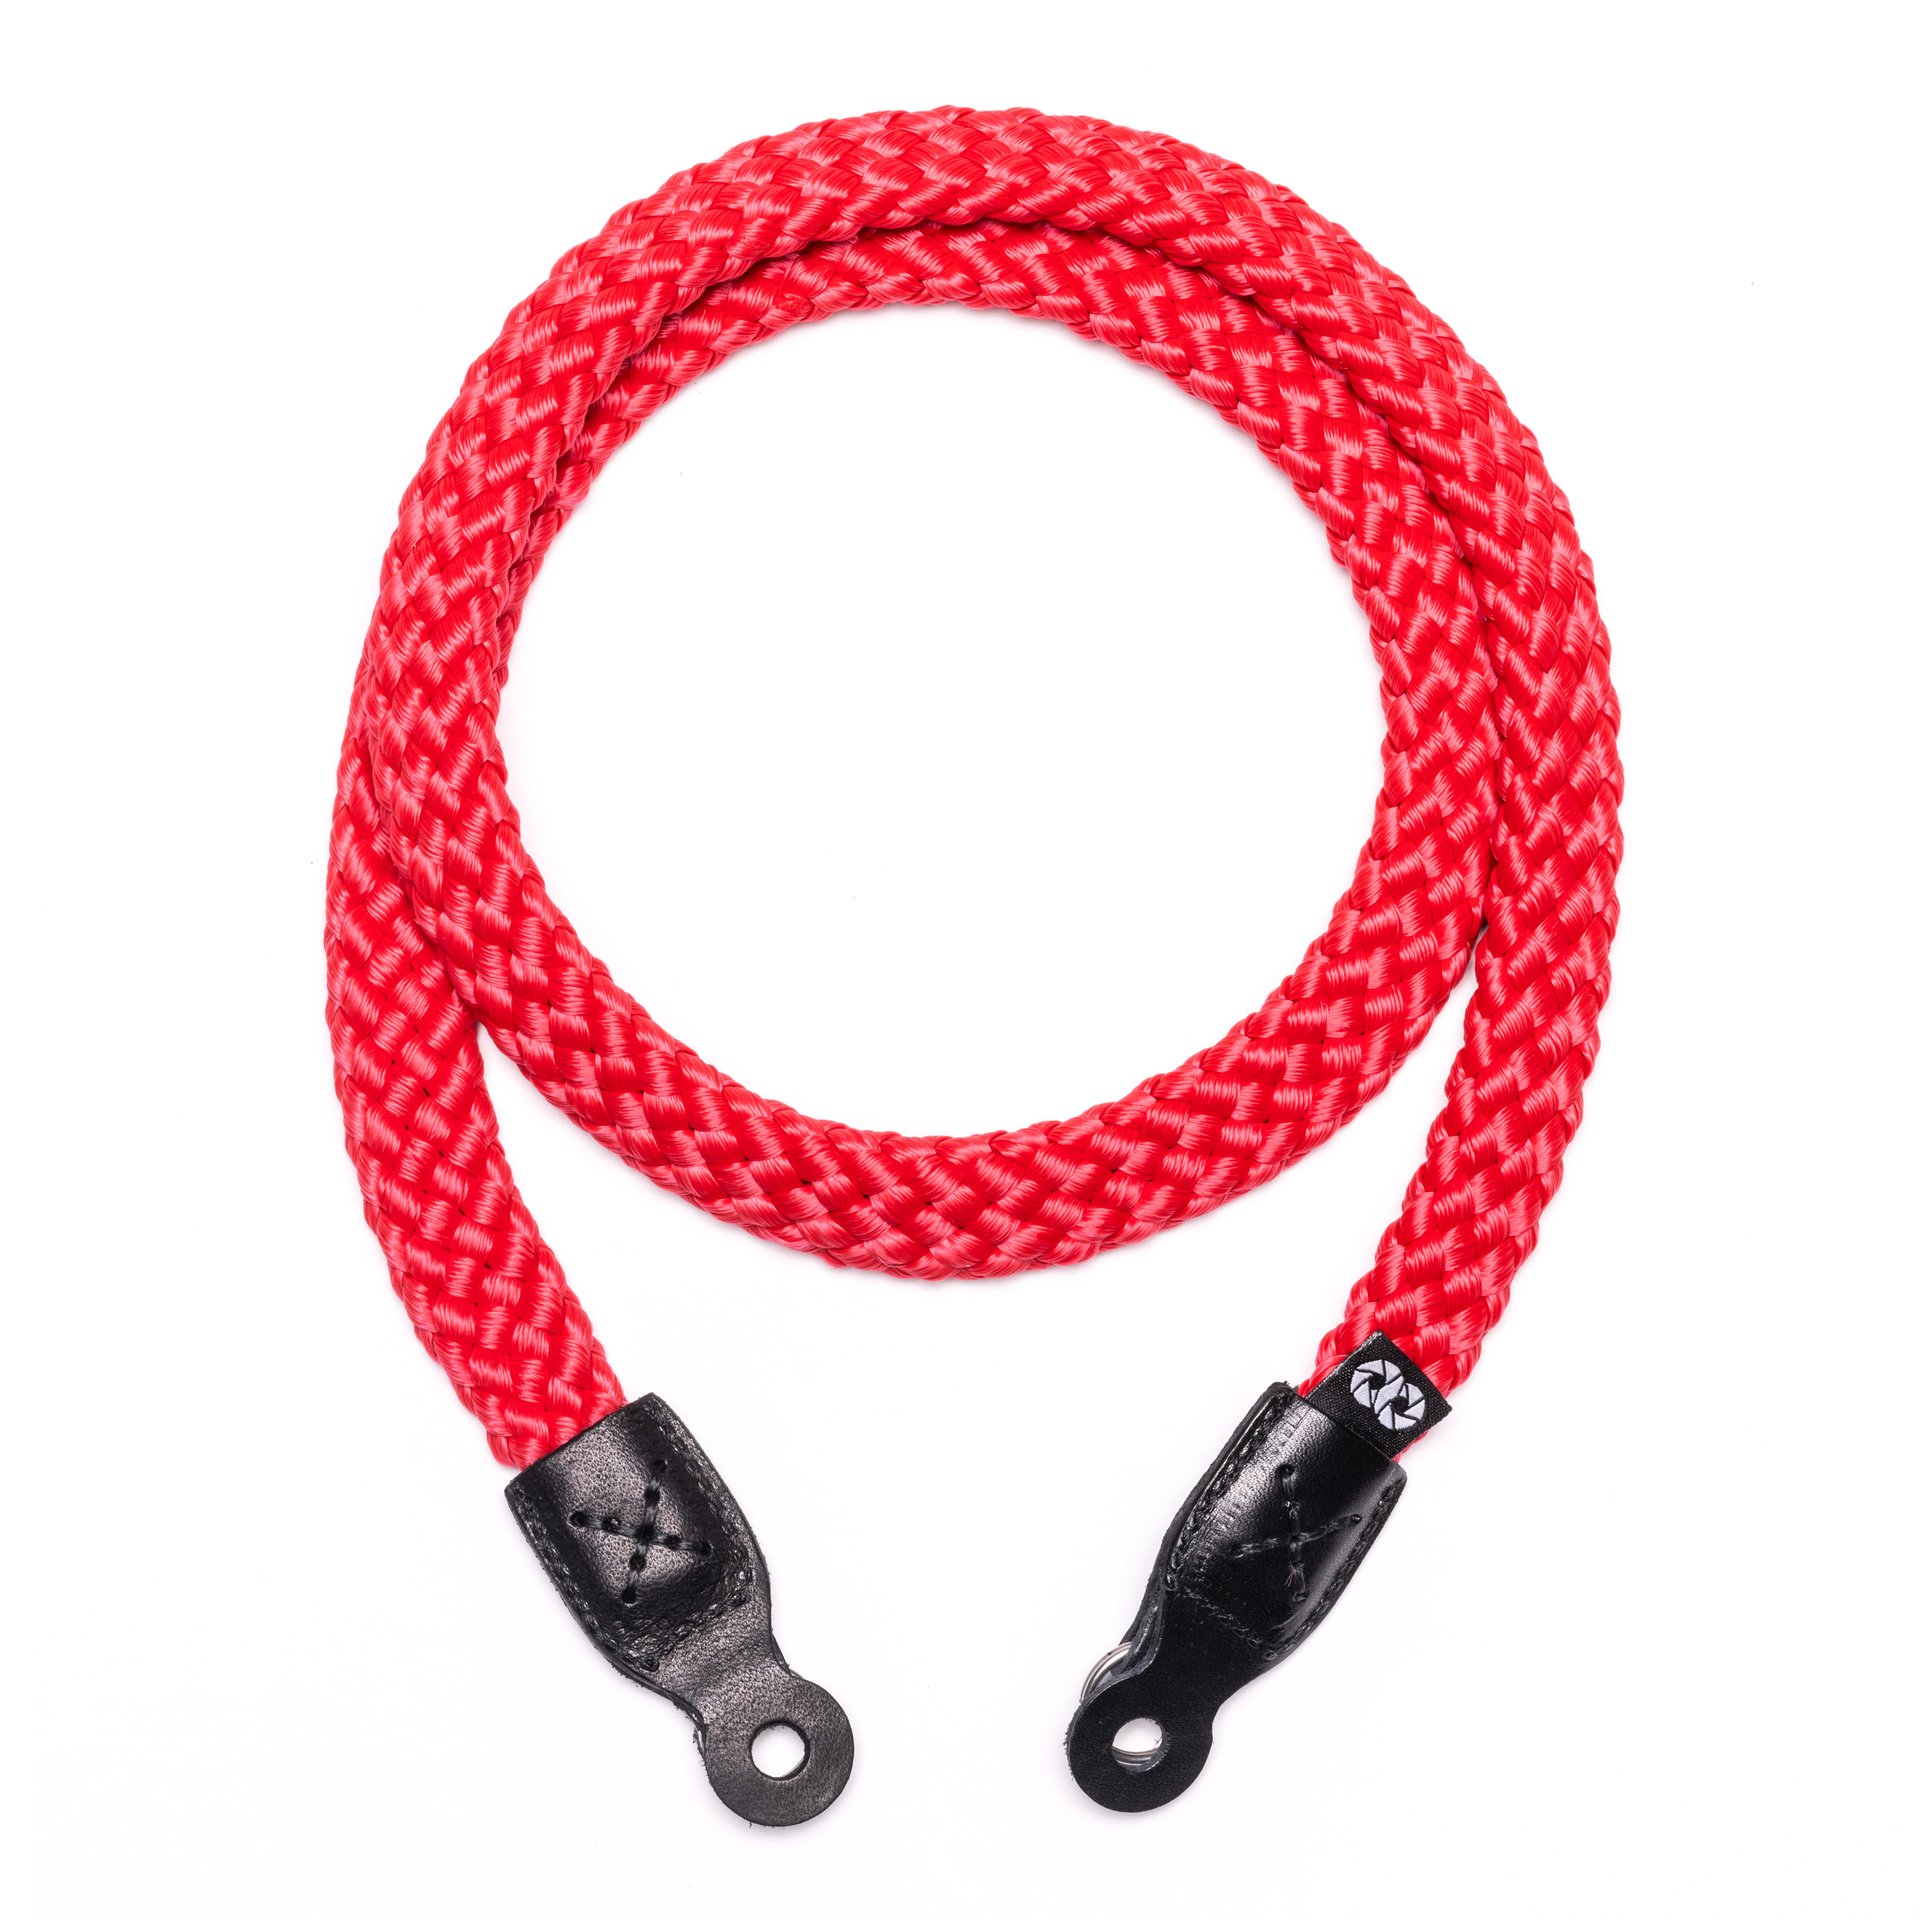 TThumbnail image for COOPH BRAID CAMERA STRAP - RED